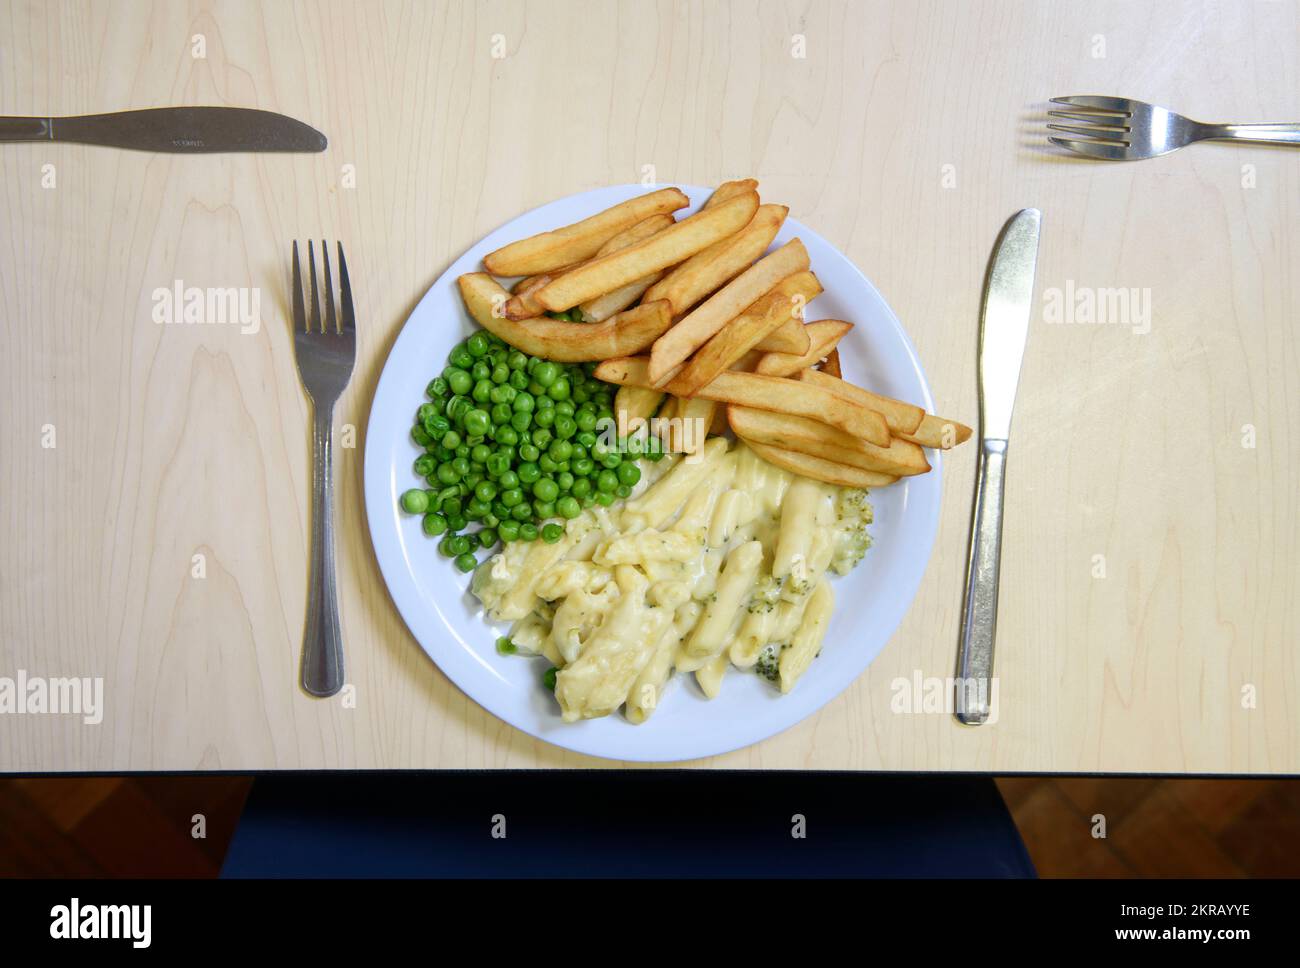 School dinners - cheese and broccoli pasta with chips. Stock Photo